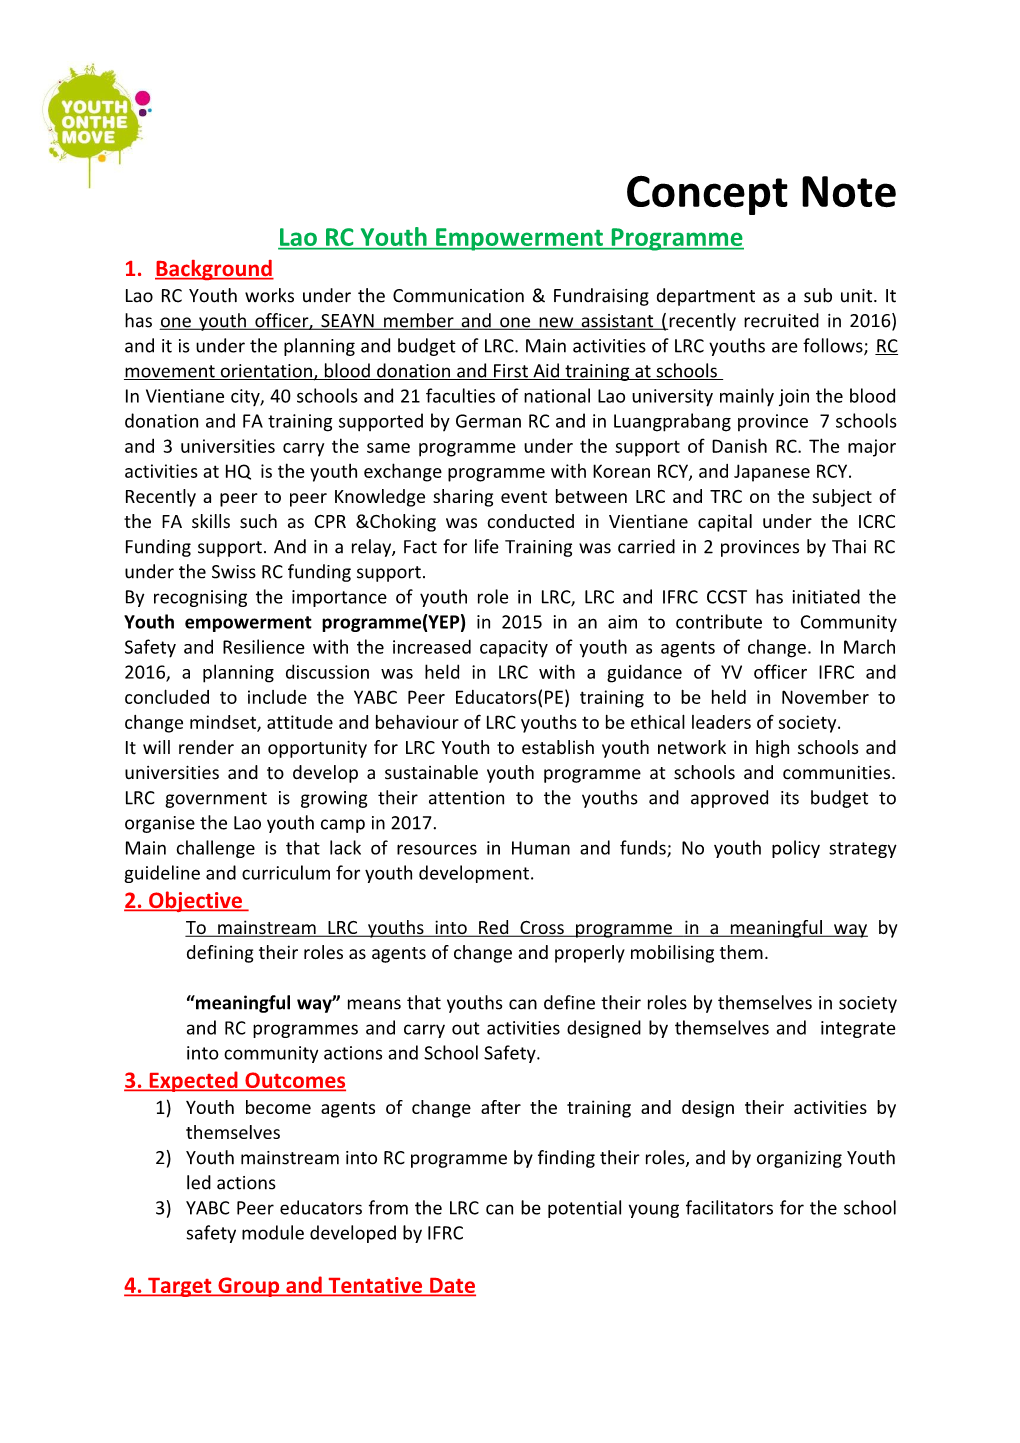 Lao RC Youth Empowerment Programme